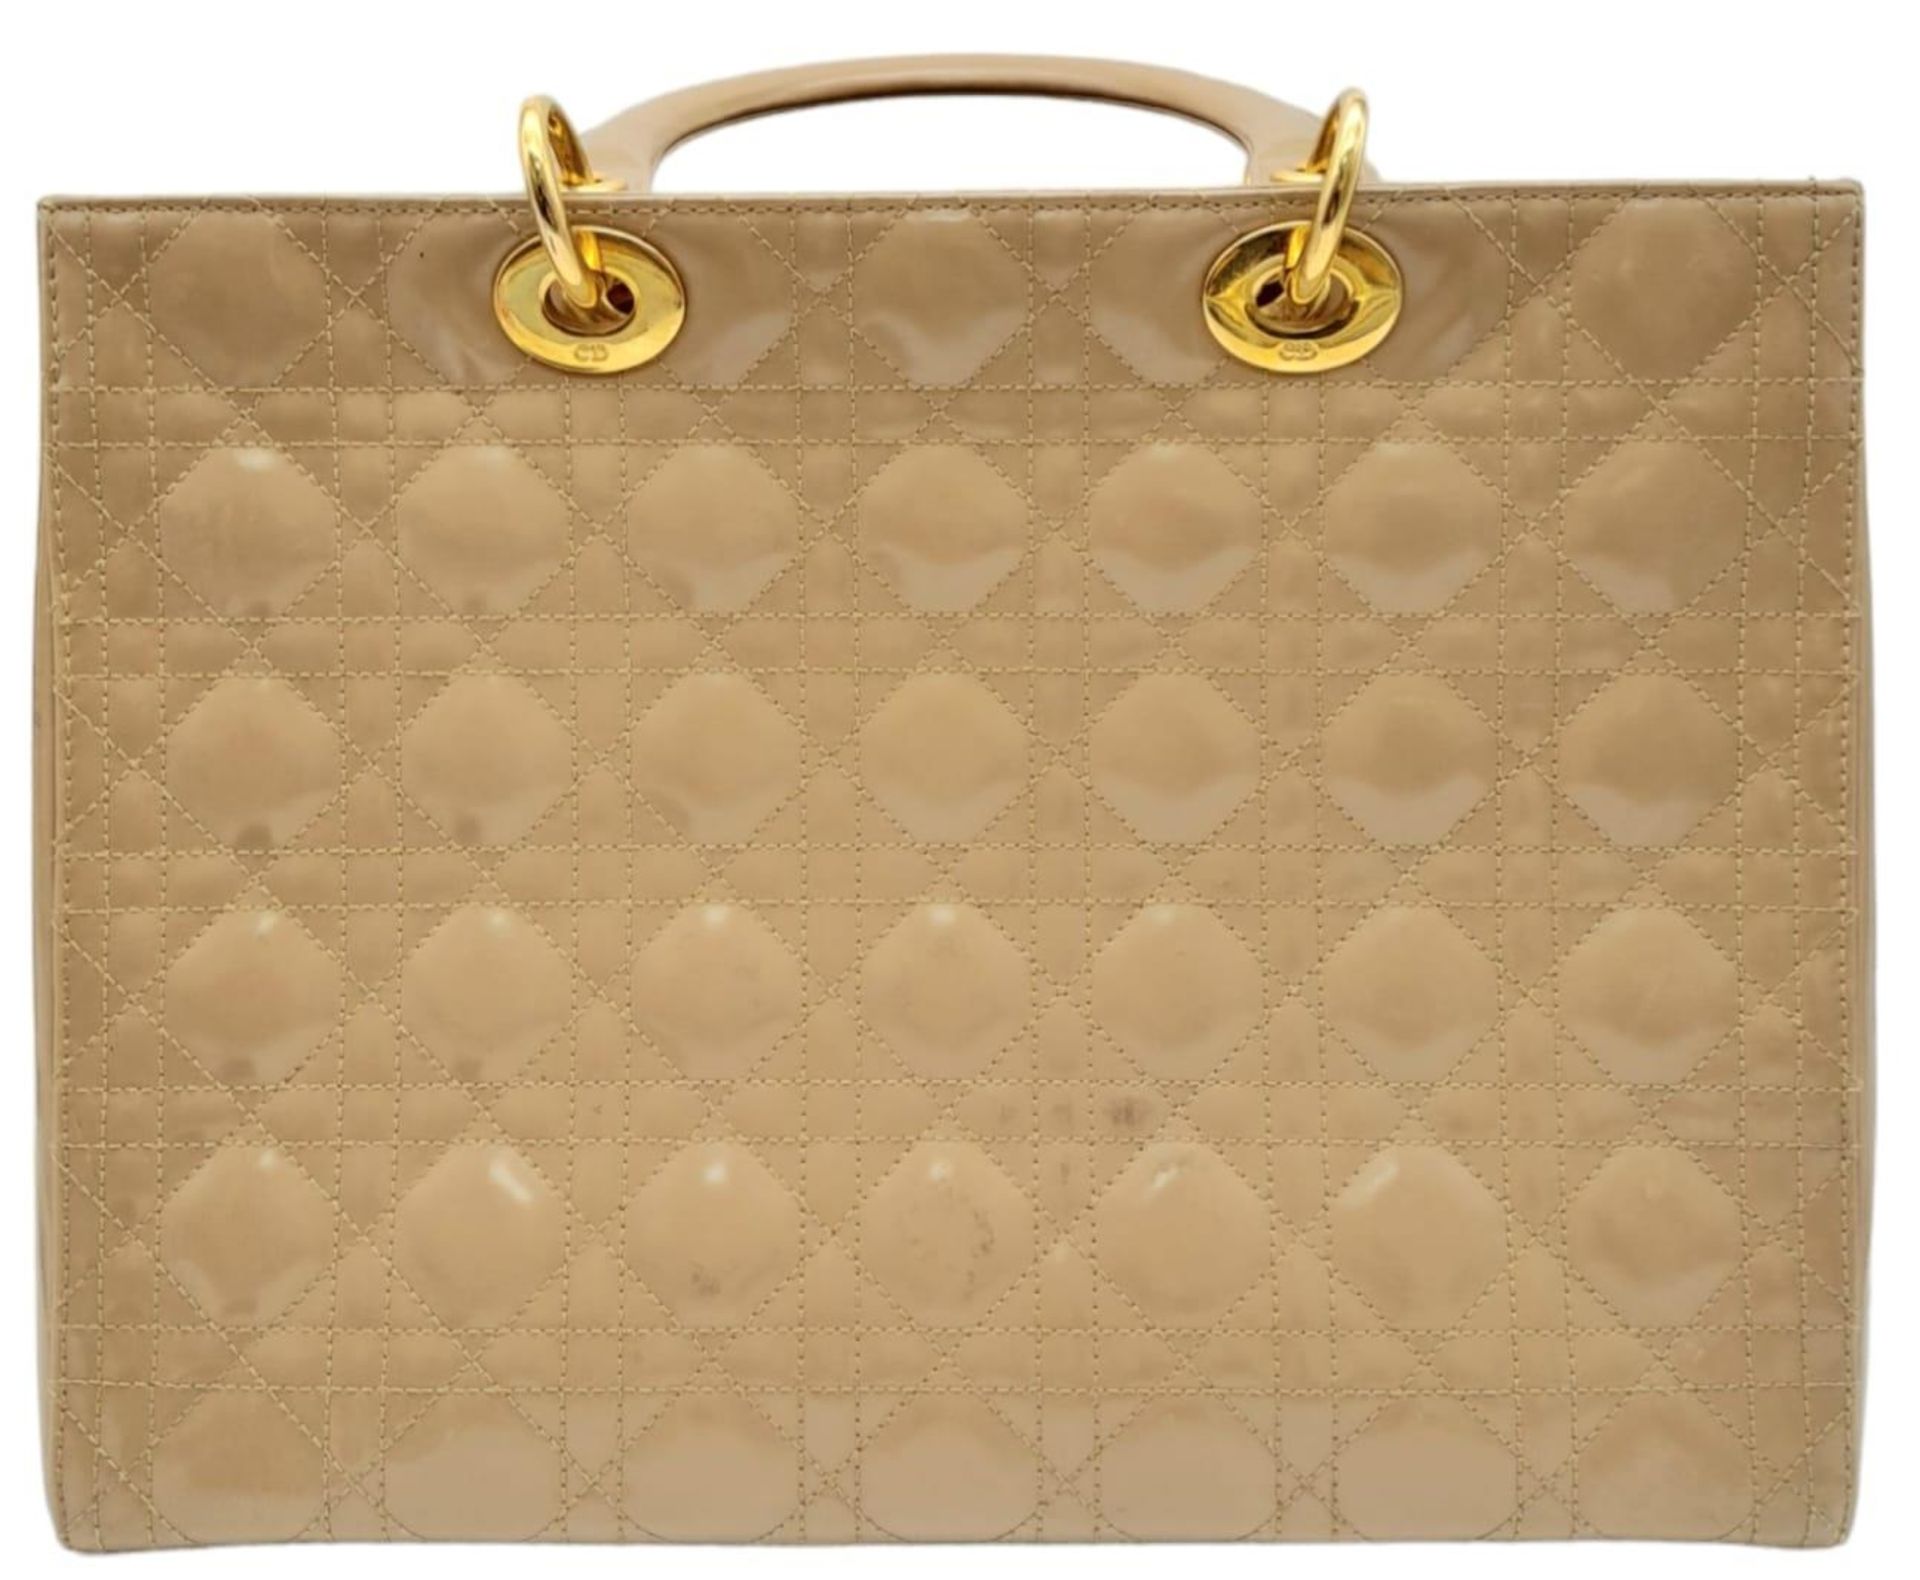 A Christian Dior Large Lady 'Diana' Dior Bag, quilted patent leather with gold tone hardware and - Image 6 of 17